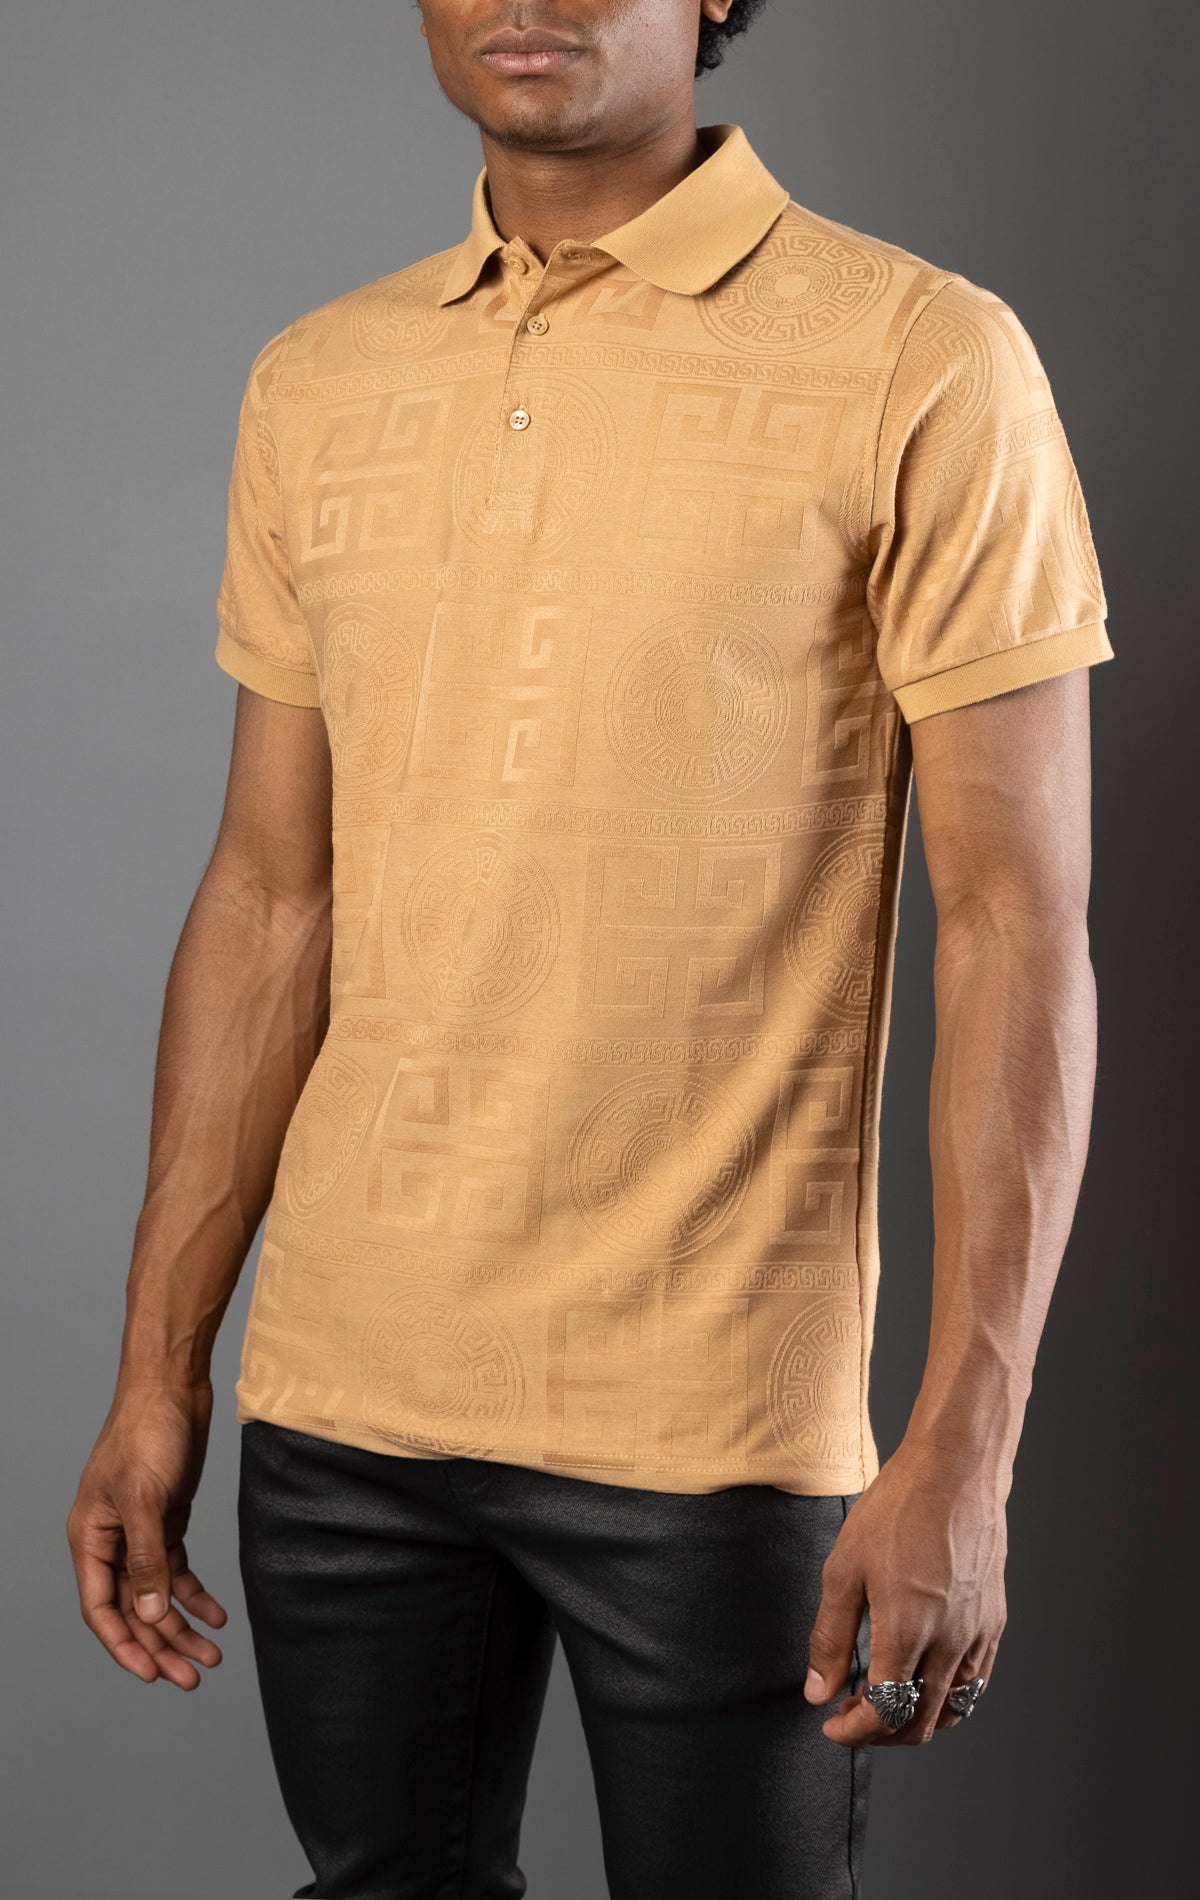 Khaki Men's regular-fit, short-sleeve polo shirt. The shirt features a seamless Greek pattern and a classic polo design